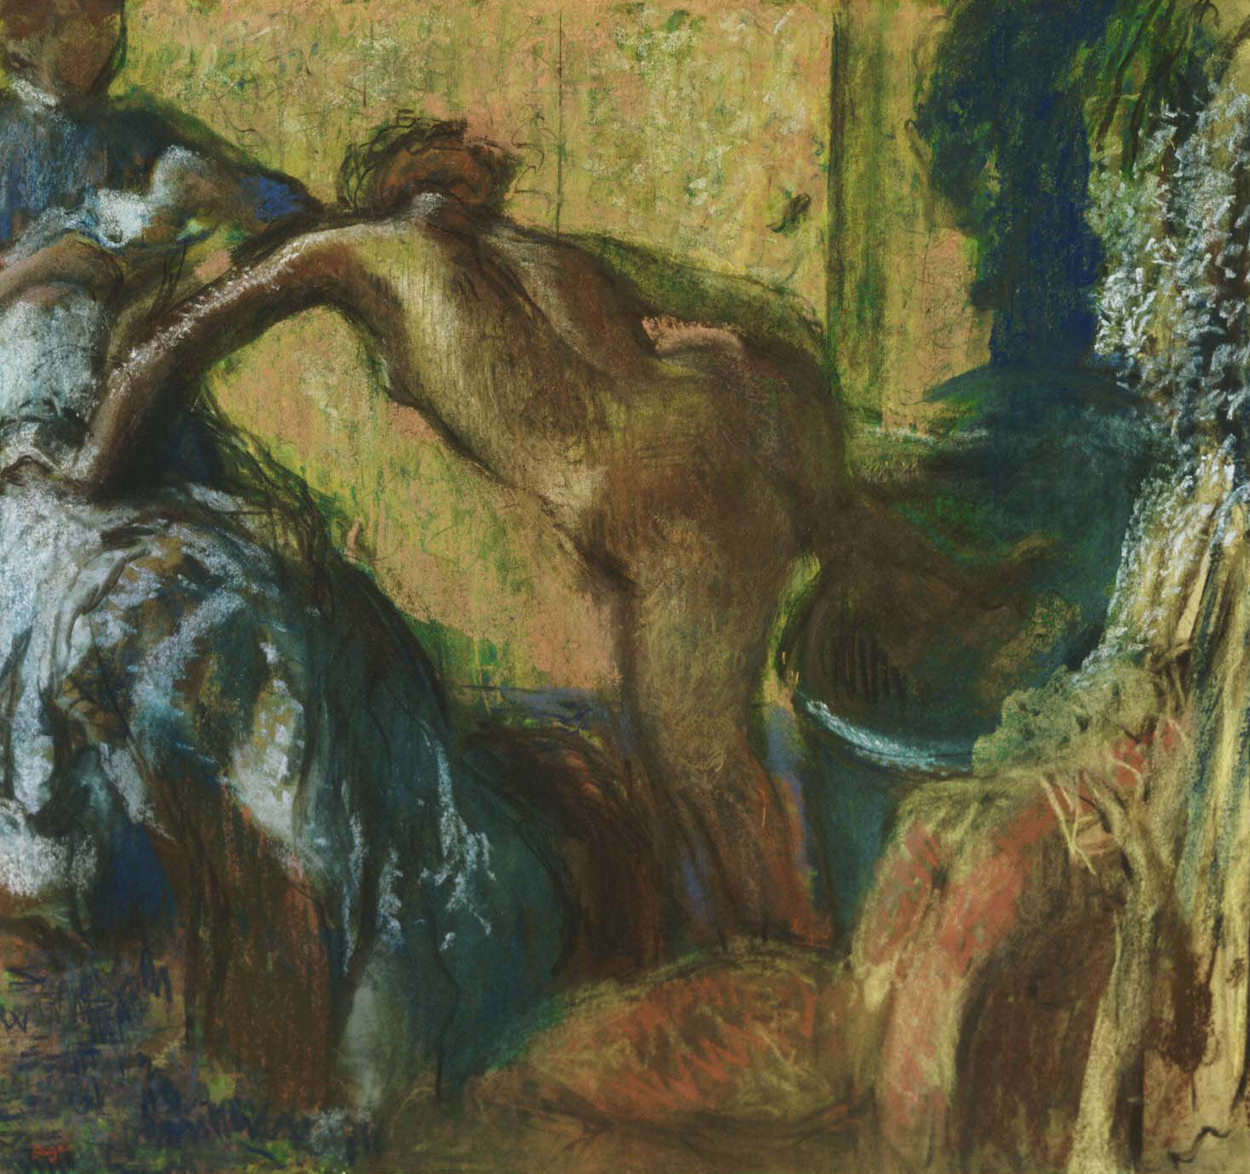 After the Bath by Edgar Degas - circa 1895 - 33.13 x 30.5 in The Phillips Collection